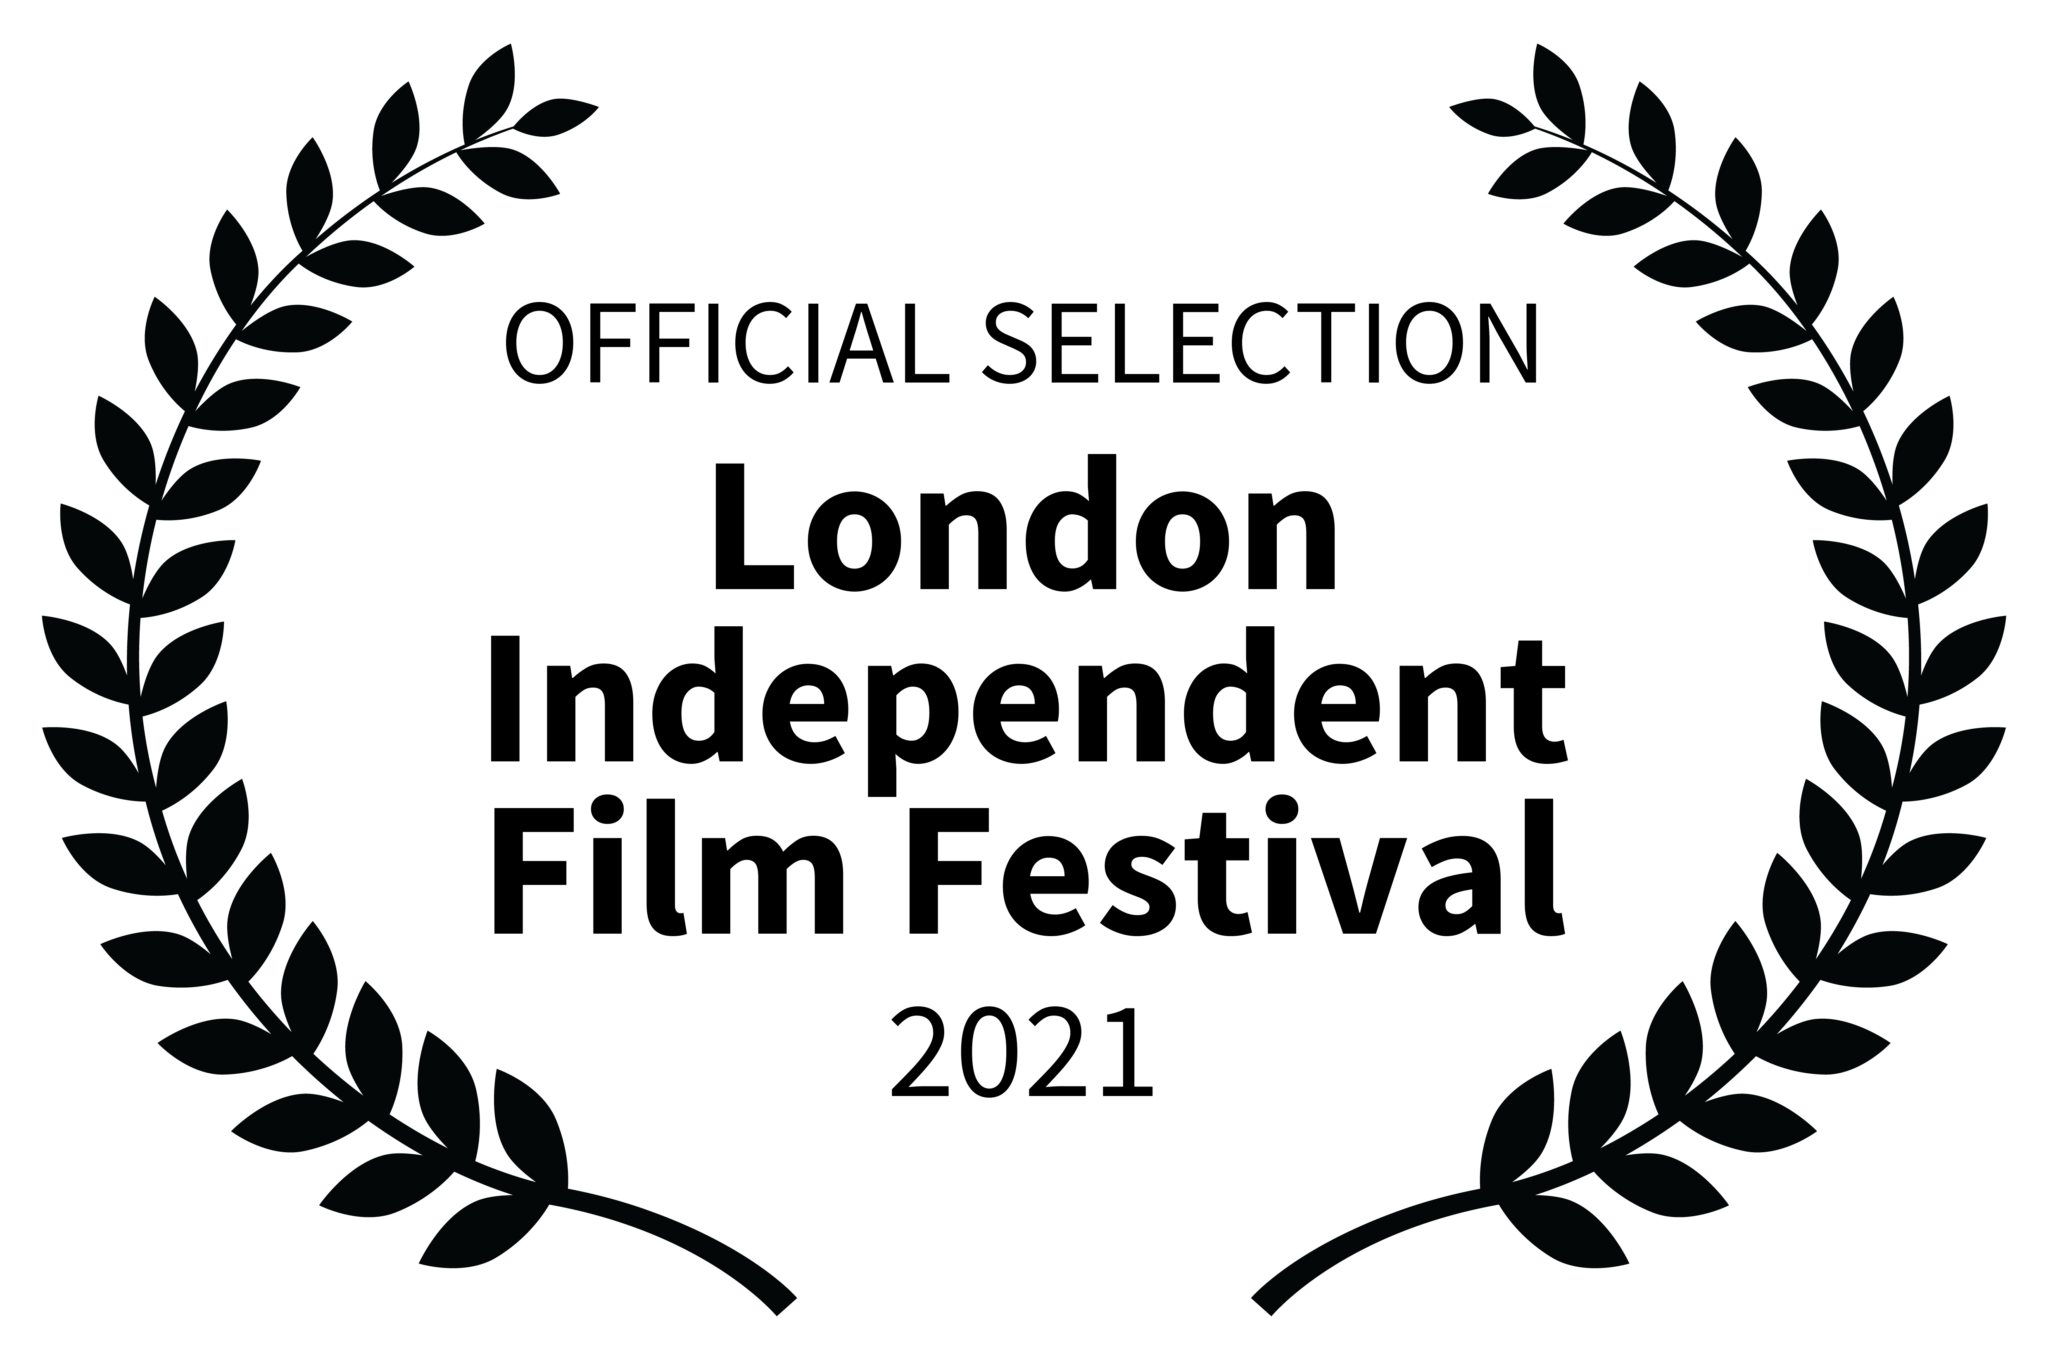 OFFICIALSELECTION-LondonIndependentFilmFestival-2021-2048x1360.png